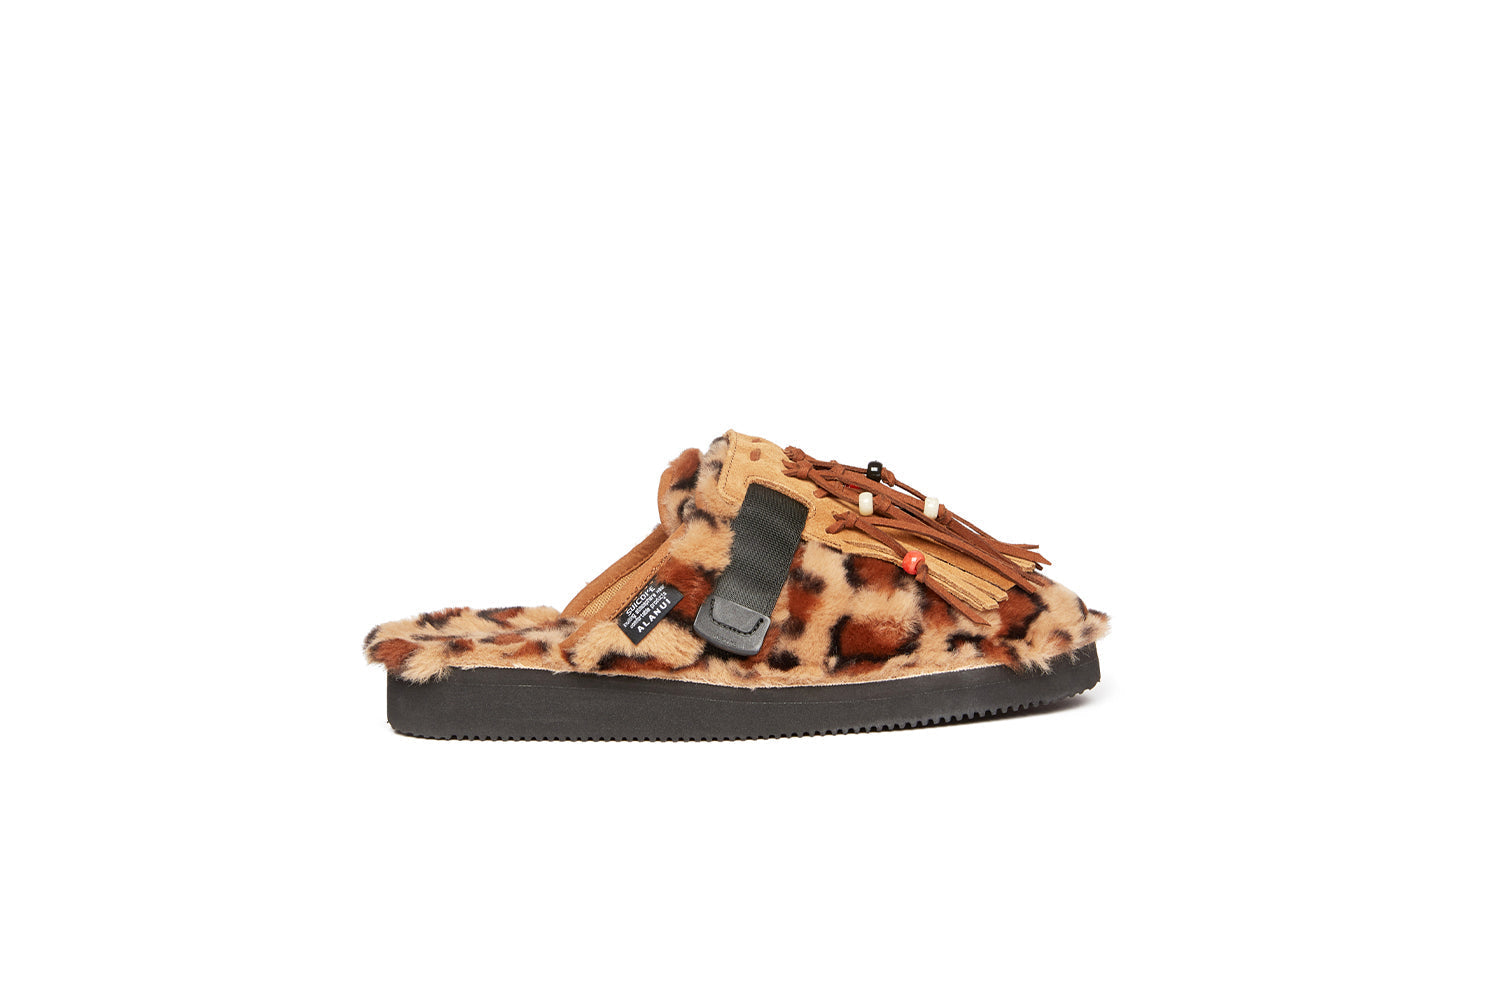 Alanui edition SUICOKE Zavo closed toe slides with leopard spotted colored fur on the upper and footbed on a black sole. Includes a dark and light brown suede-beaded fringe that is a detachable piece from the singular nylon strap across the upper. From Fall/Winter 2021 collection on SUICOKE Official US &amp; Canada Webstore.